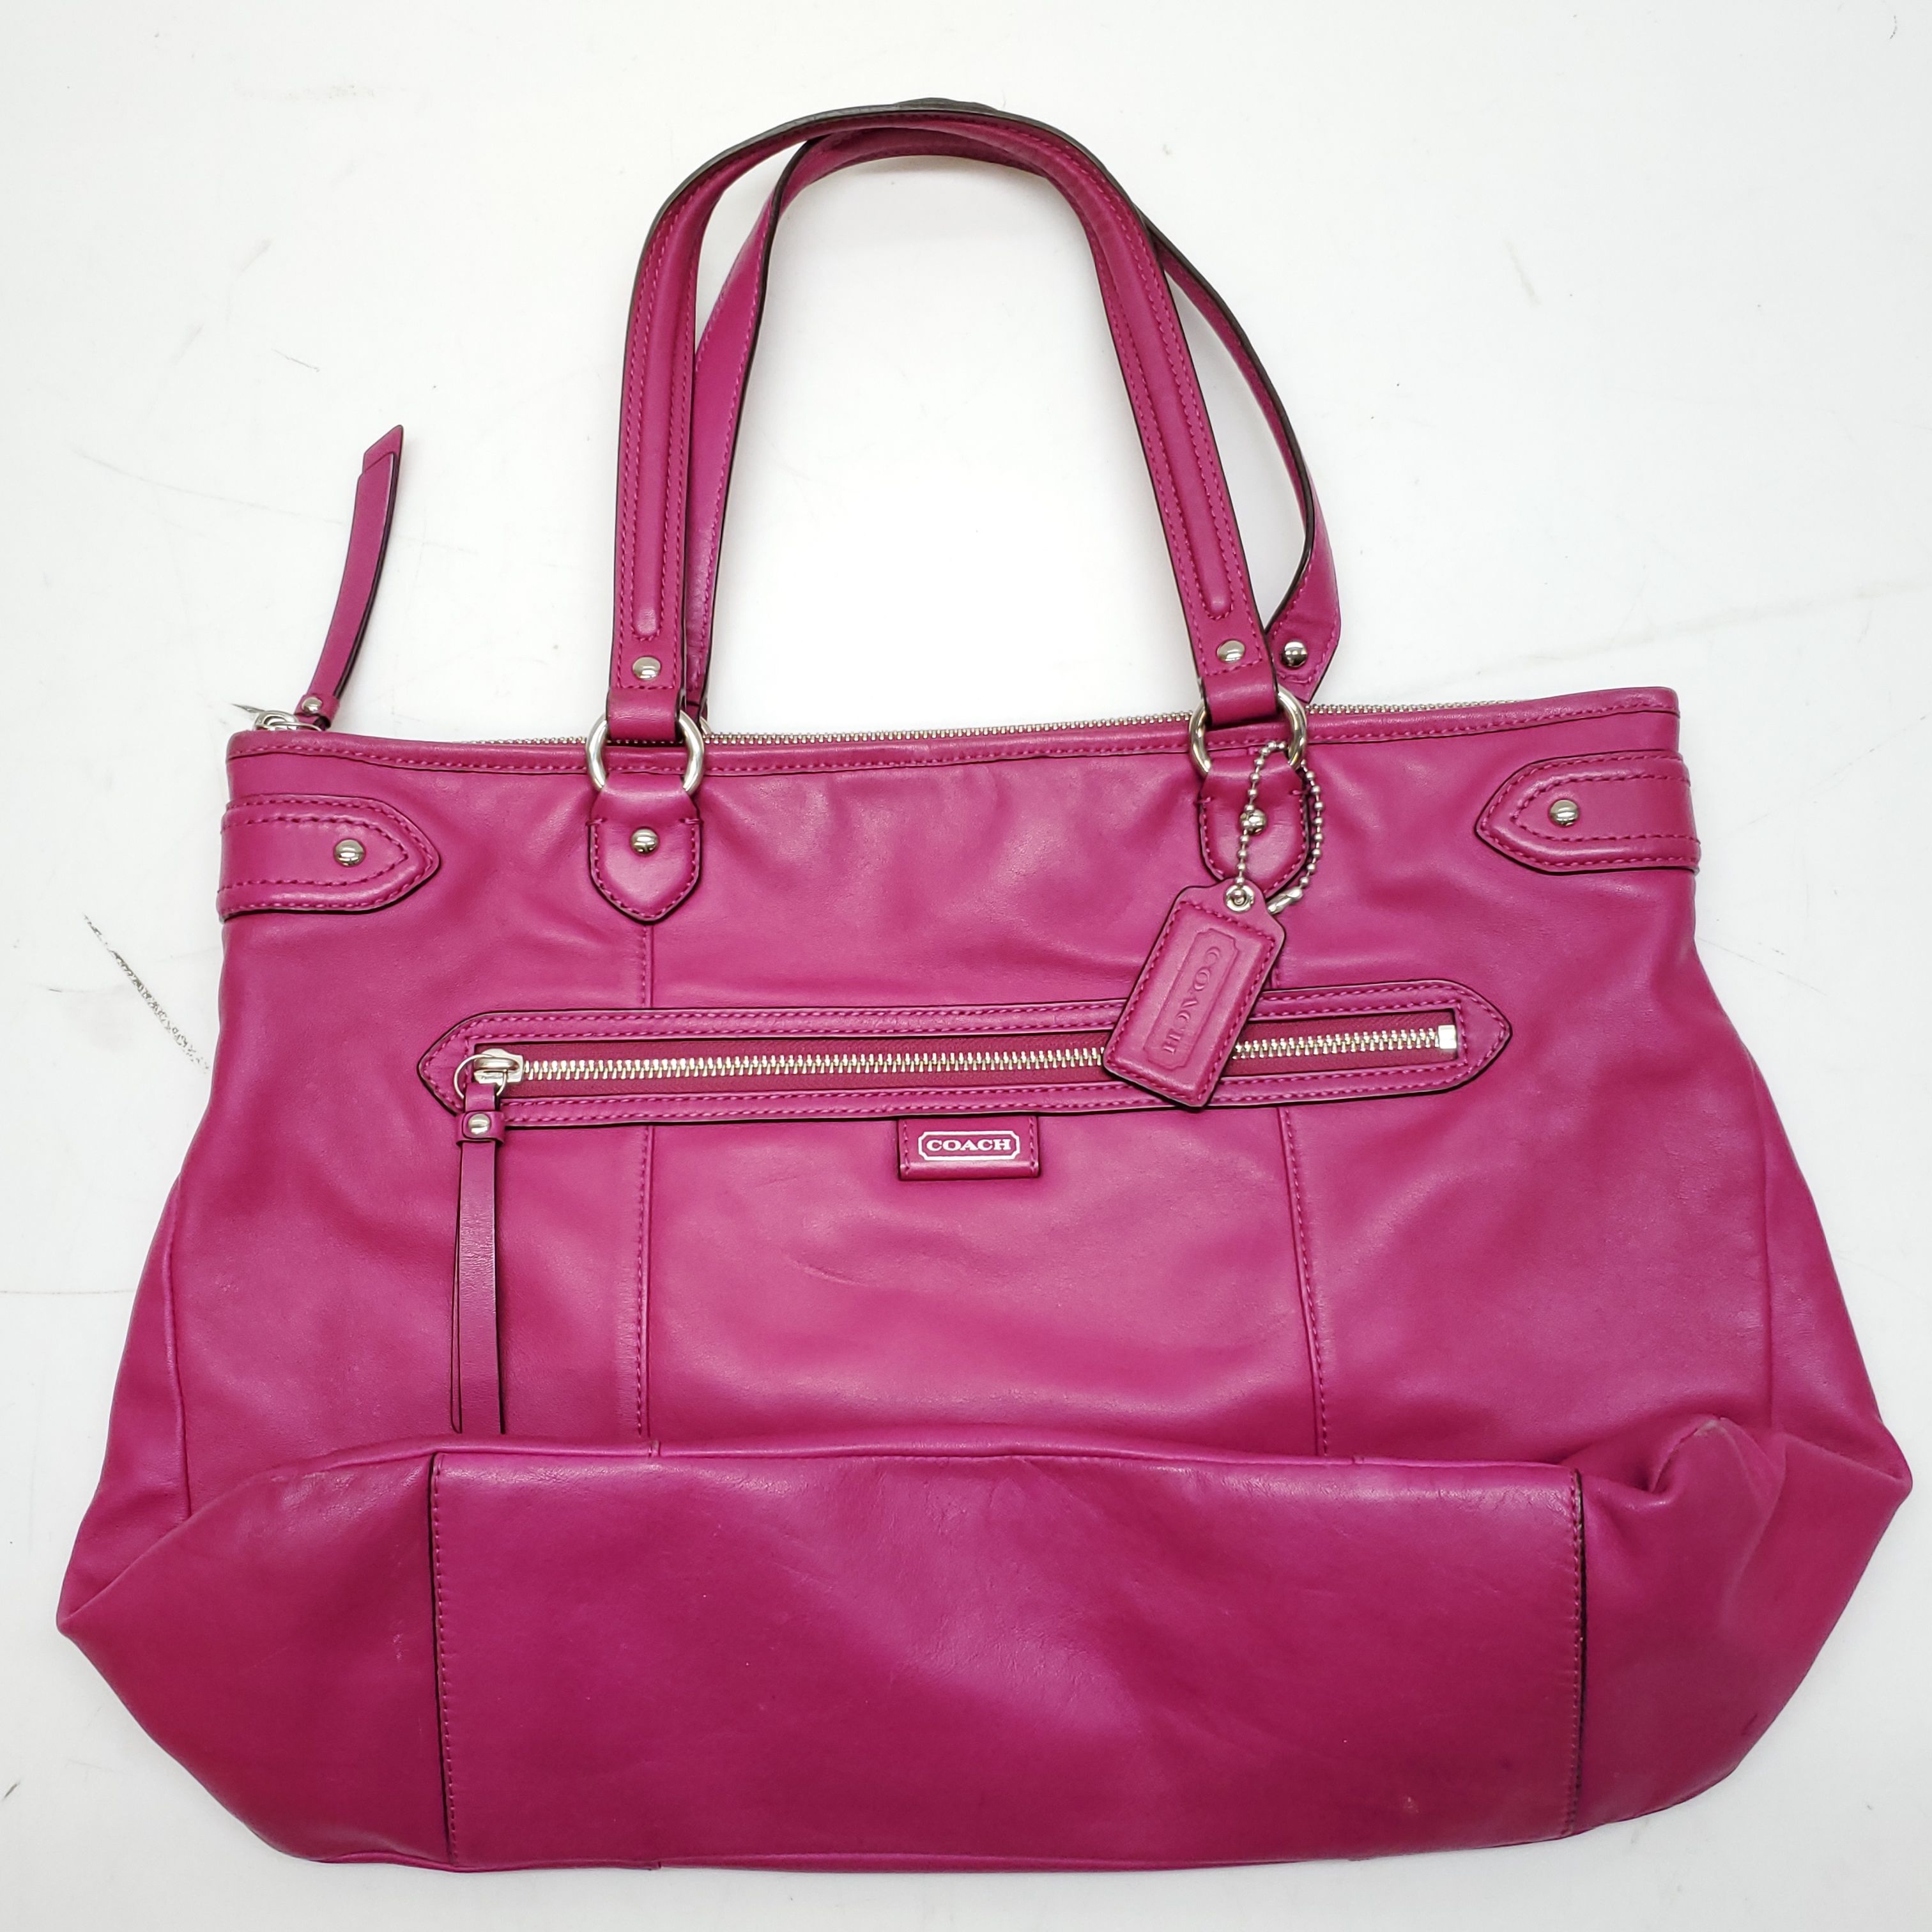 Signature sufflette leather handbag Coach Pink in Leather - 37149717